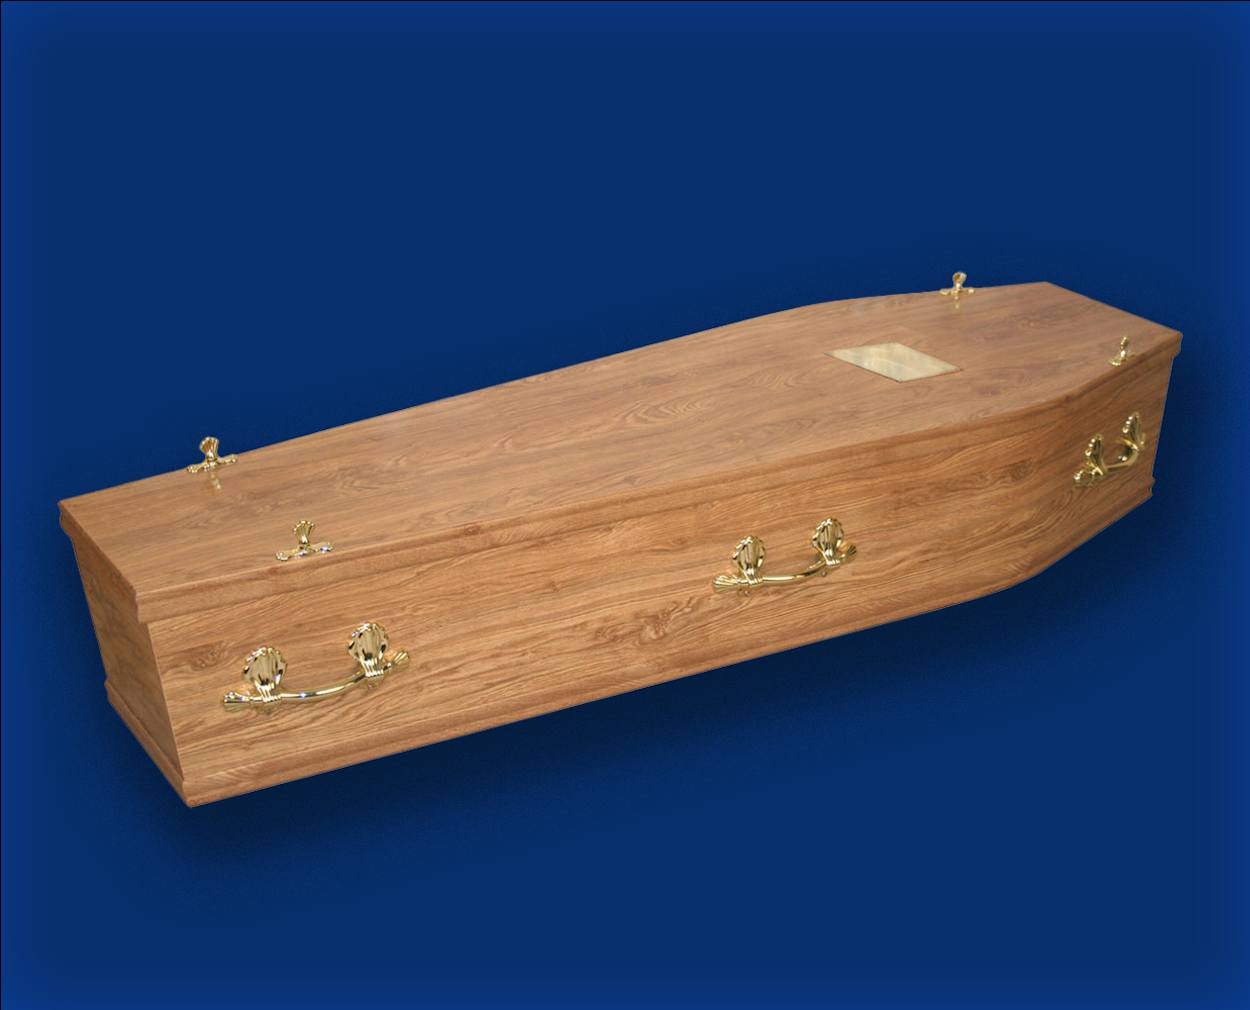 The Celebration of Life Simple Coffin